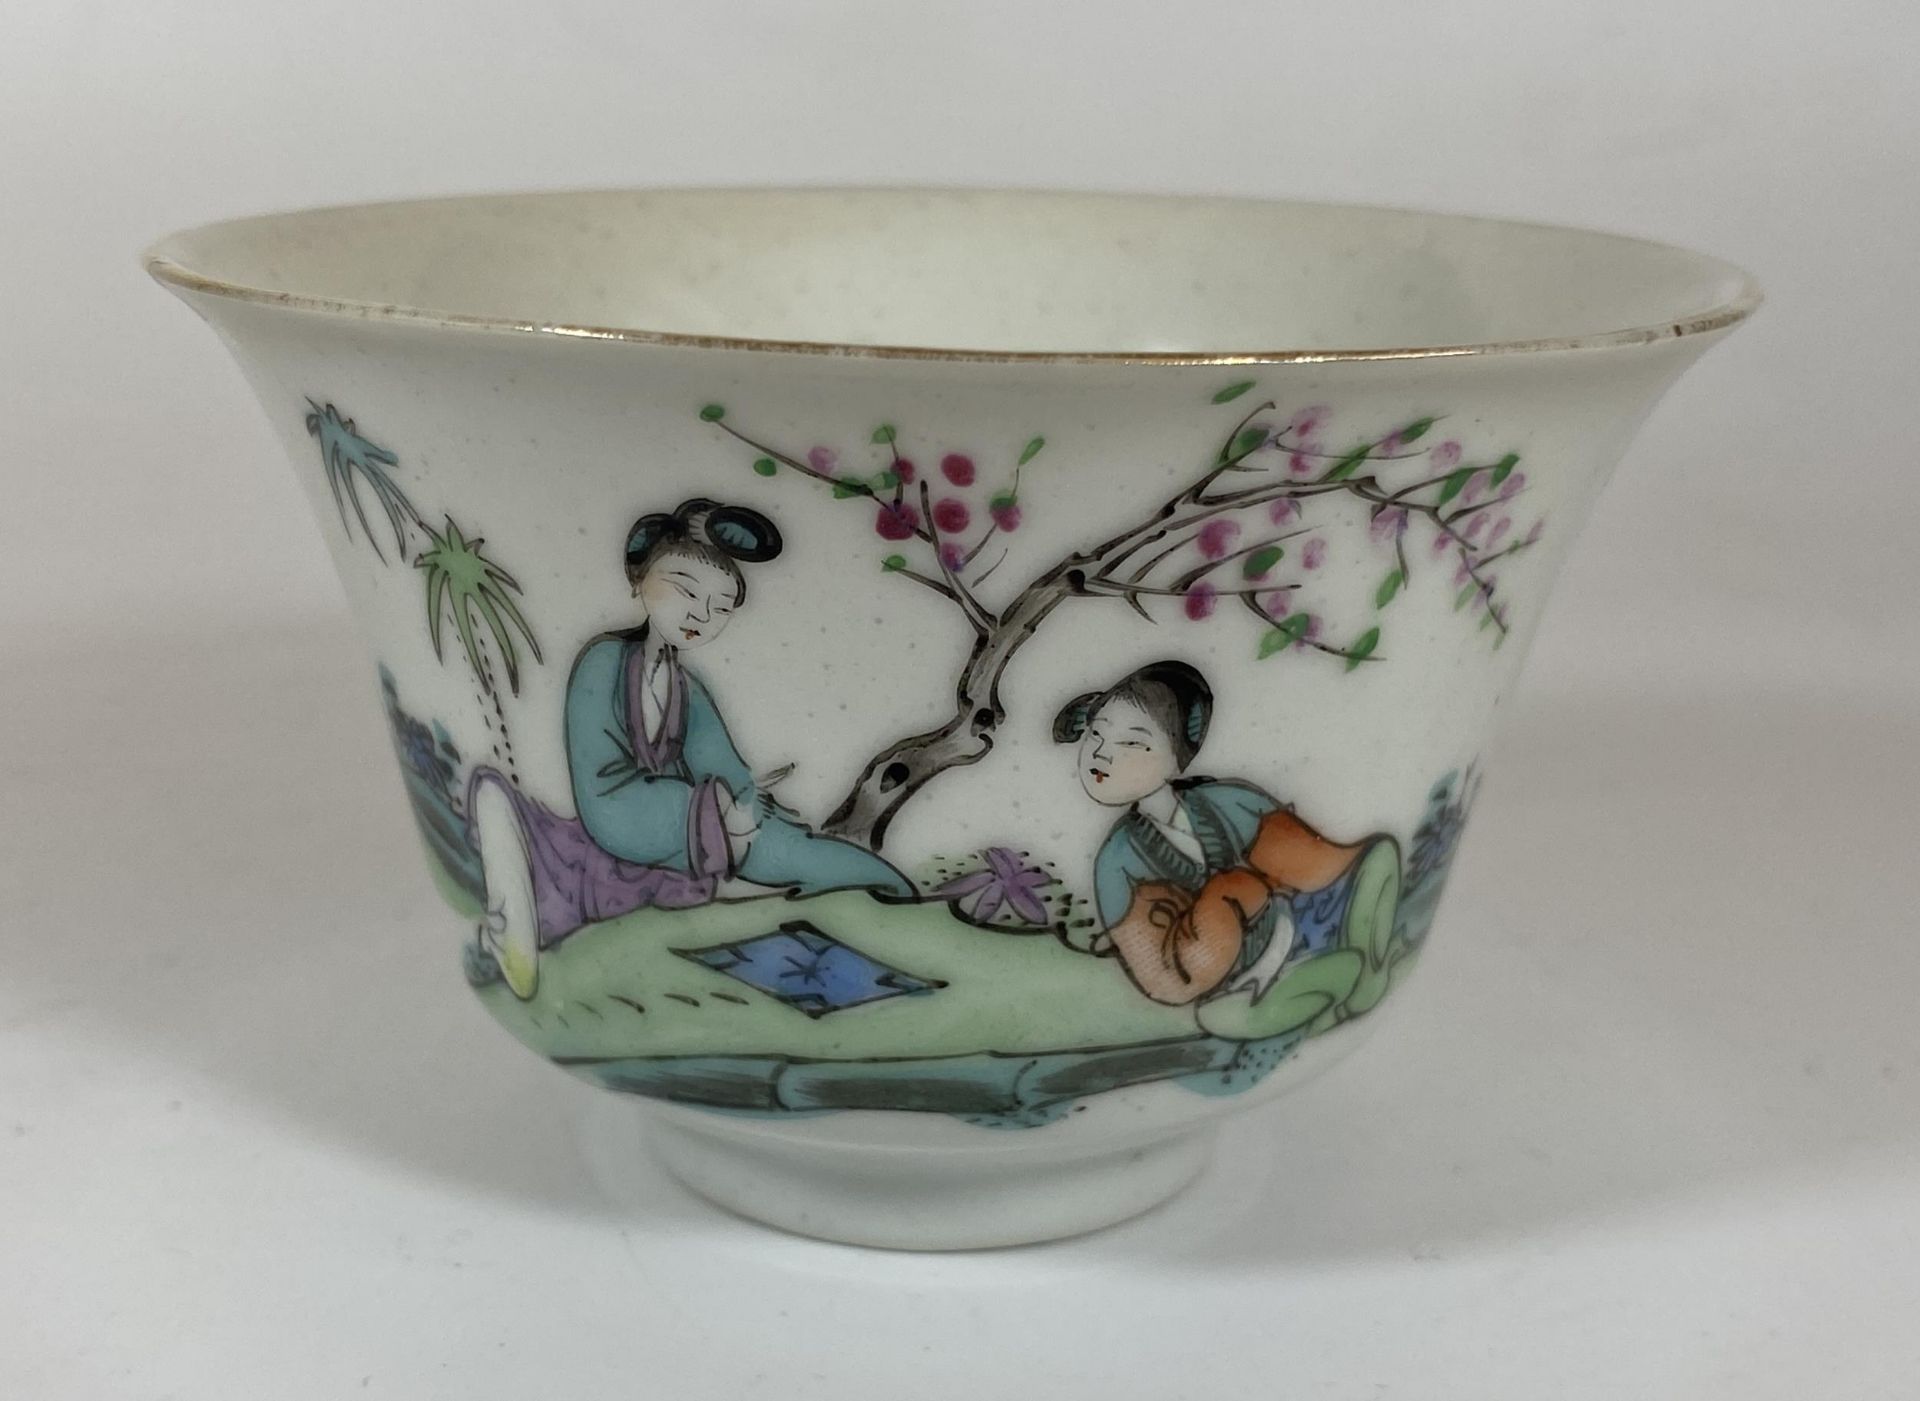 AN EARLY 20TH CENTURY CHINESE PORCELAIN TEA BOWL WITH FIGURES IN GARDEN DESIGN, FOUR CHARACTER